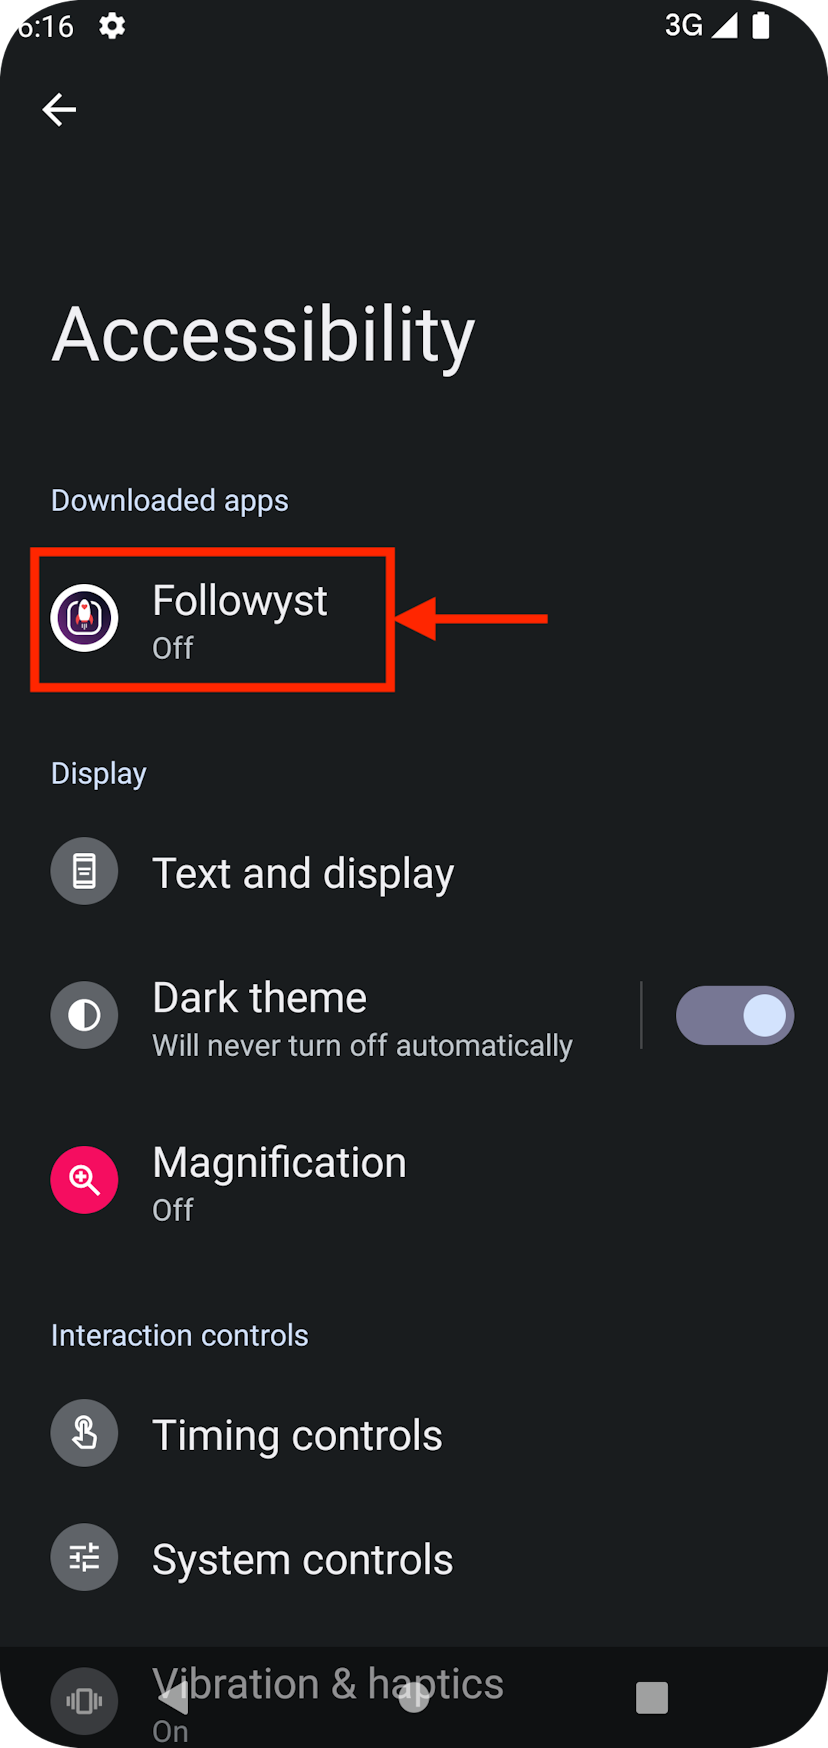 Screenshot of Android's Accessibility settings app